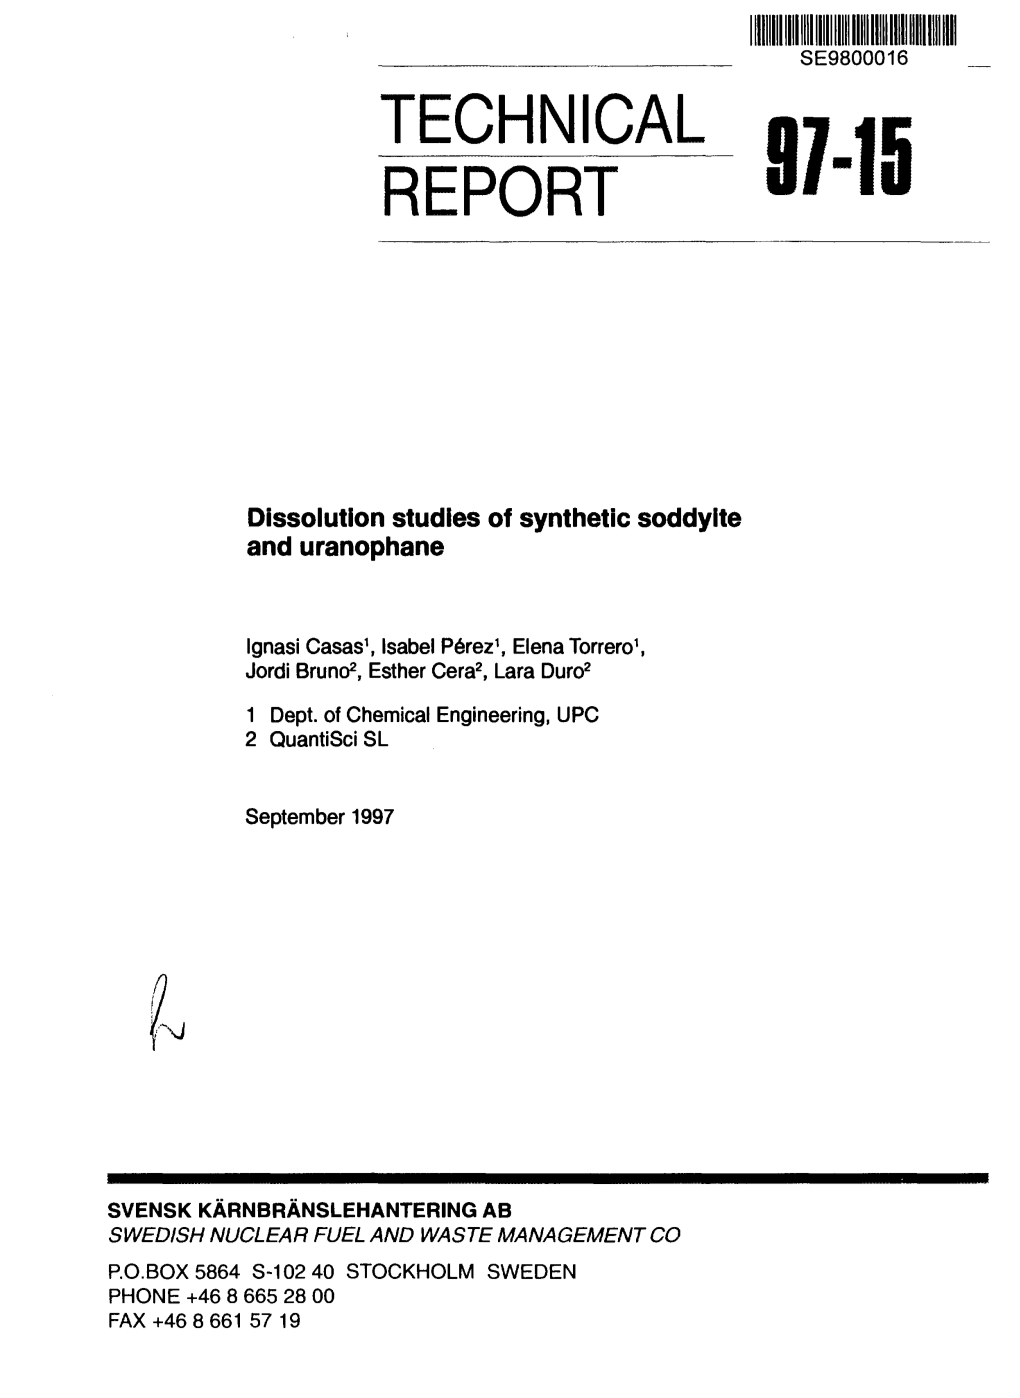 Dissolution Studies of Synthetic Soddyite and Uranophane